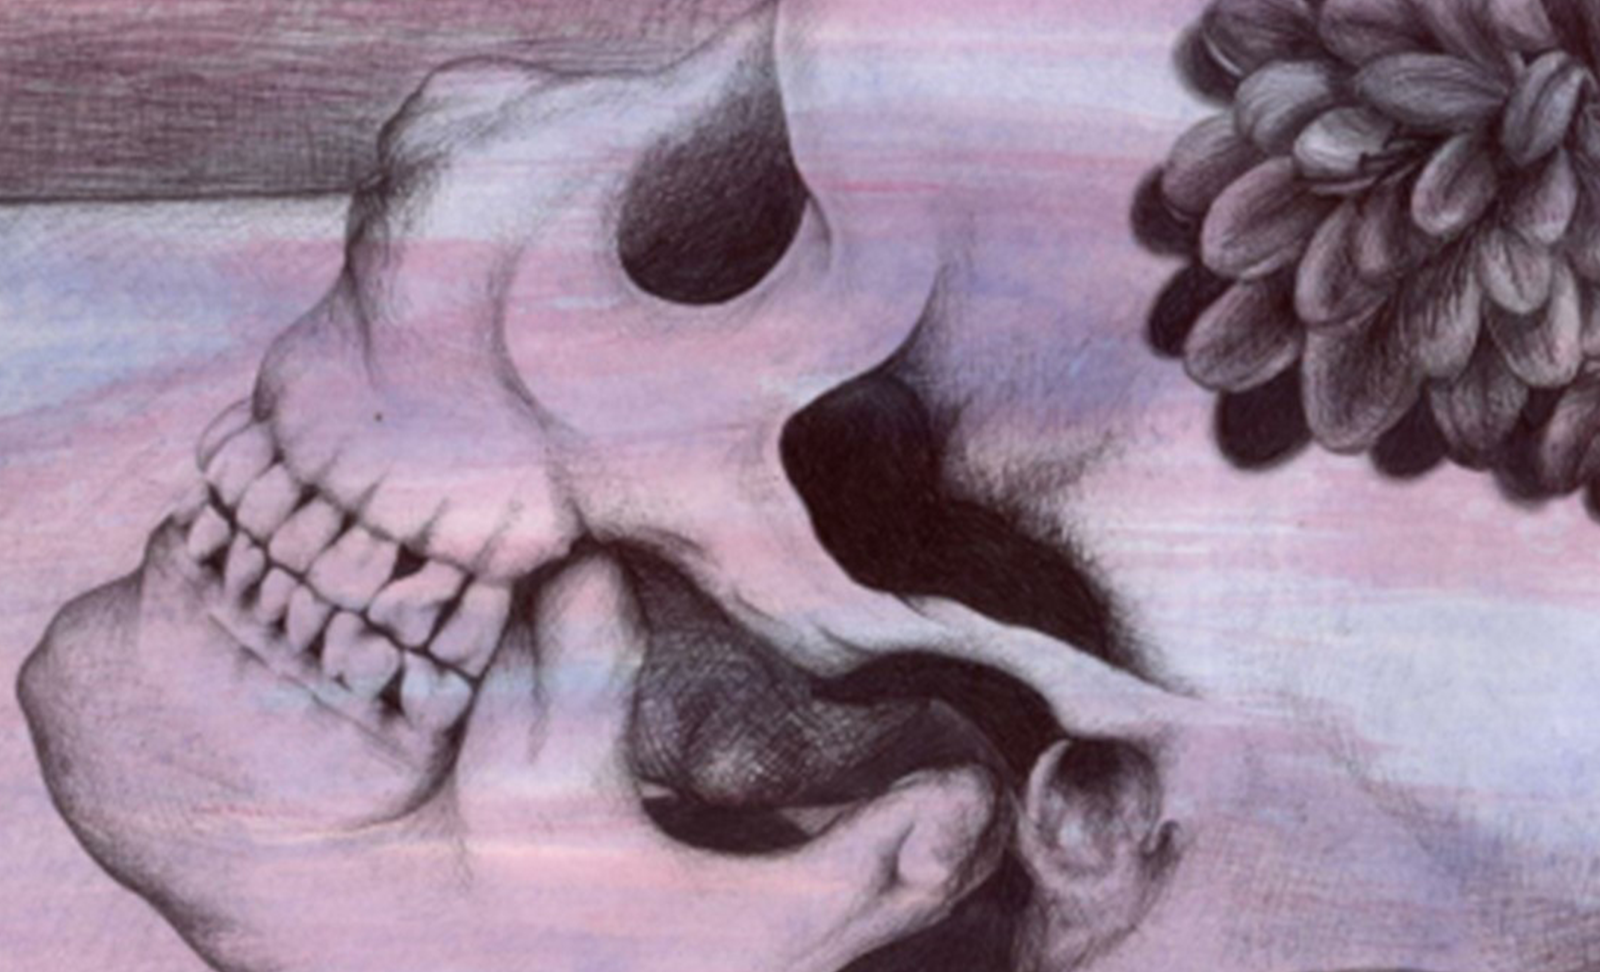 Arielle Johnson’s untitled still-life drawing featuring a skull - winner of the 2019 Juried Art Show